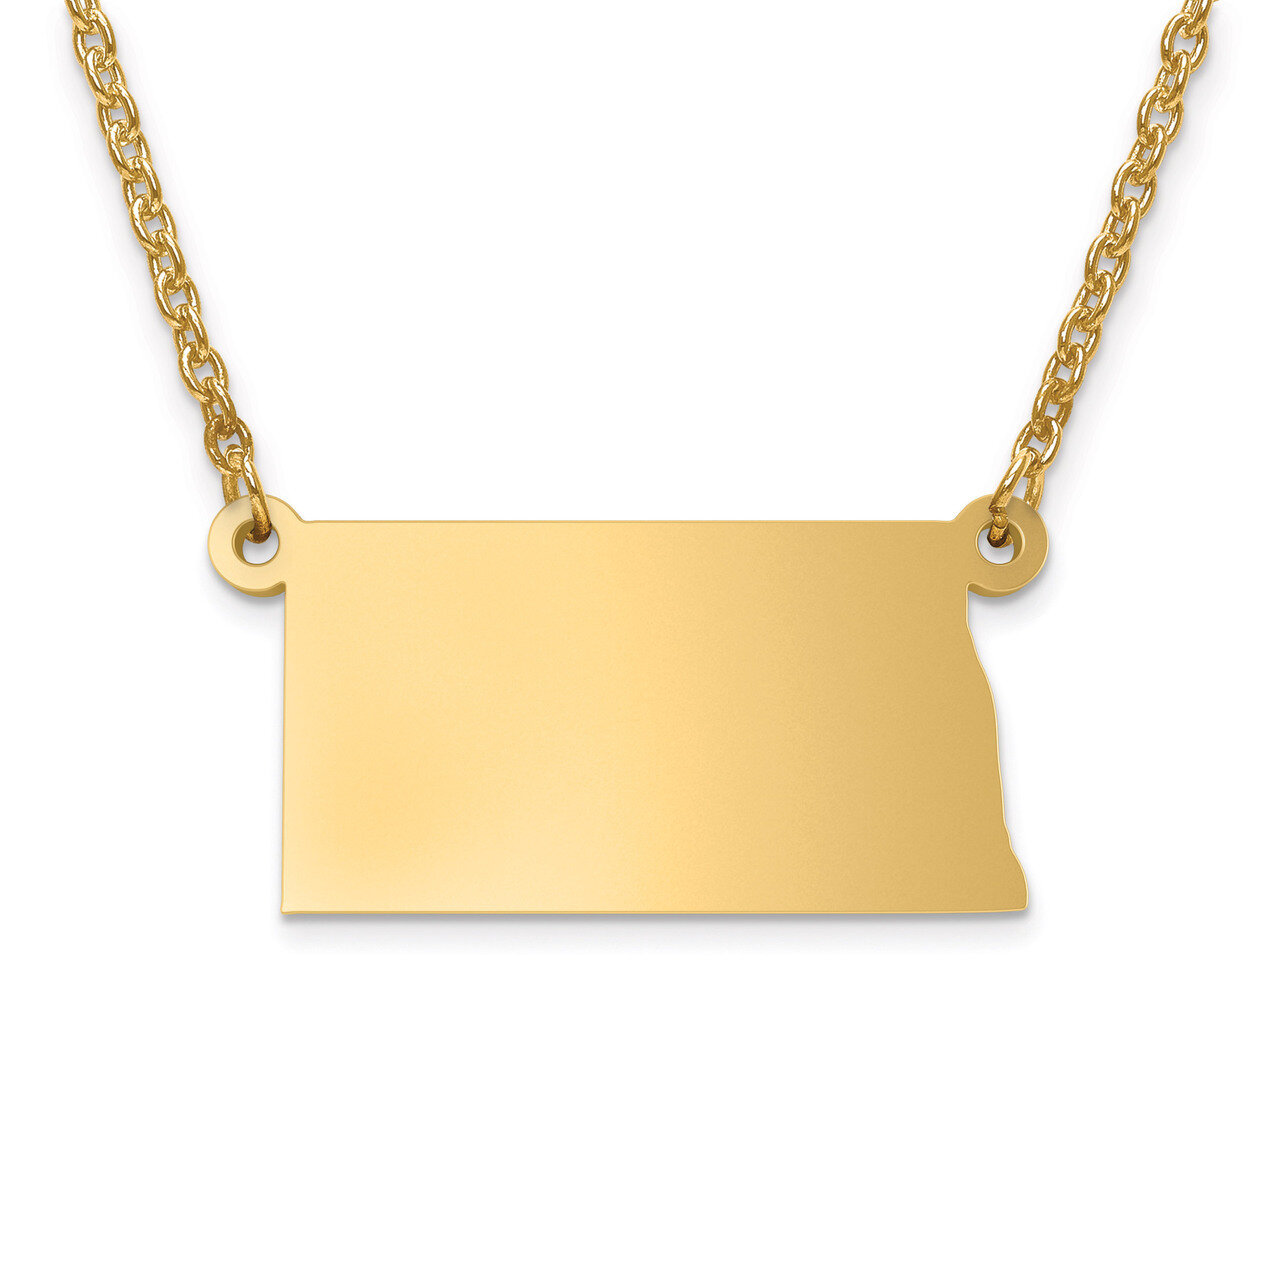 North Dakota State Pendant with Chain Engravable Gold-plated on Sterling Silver